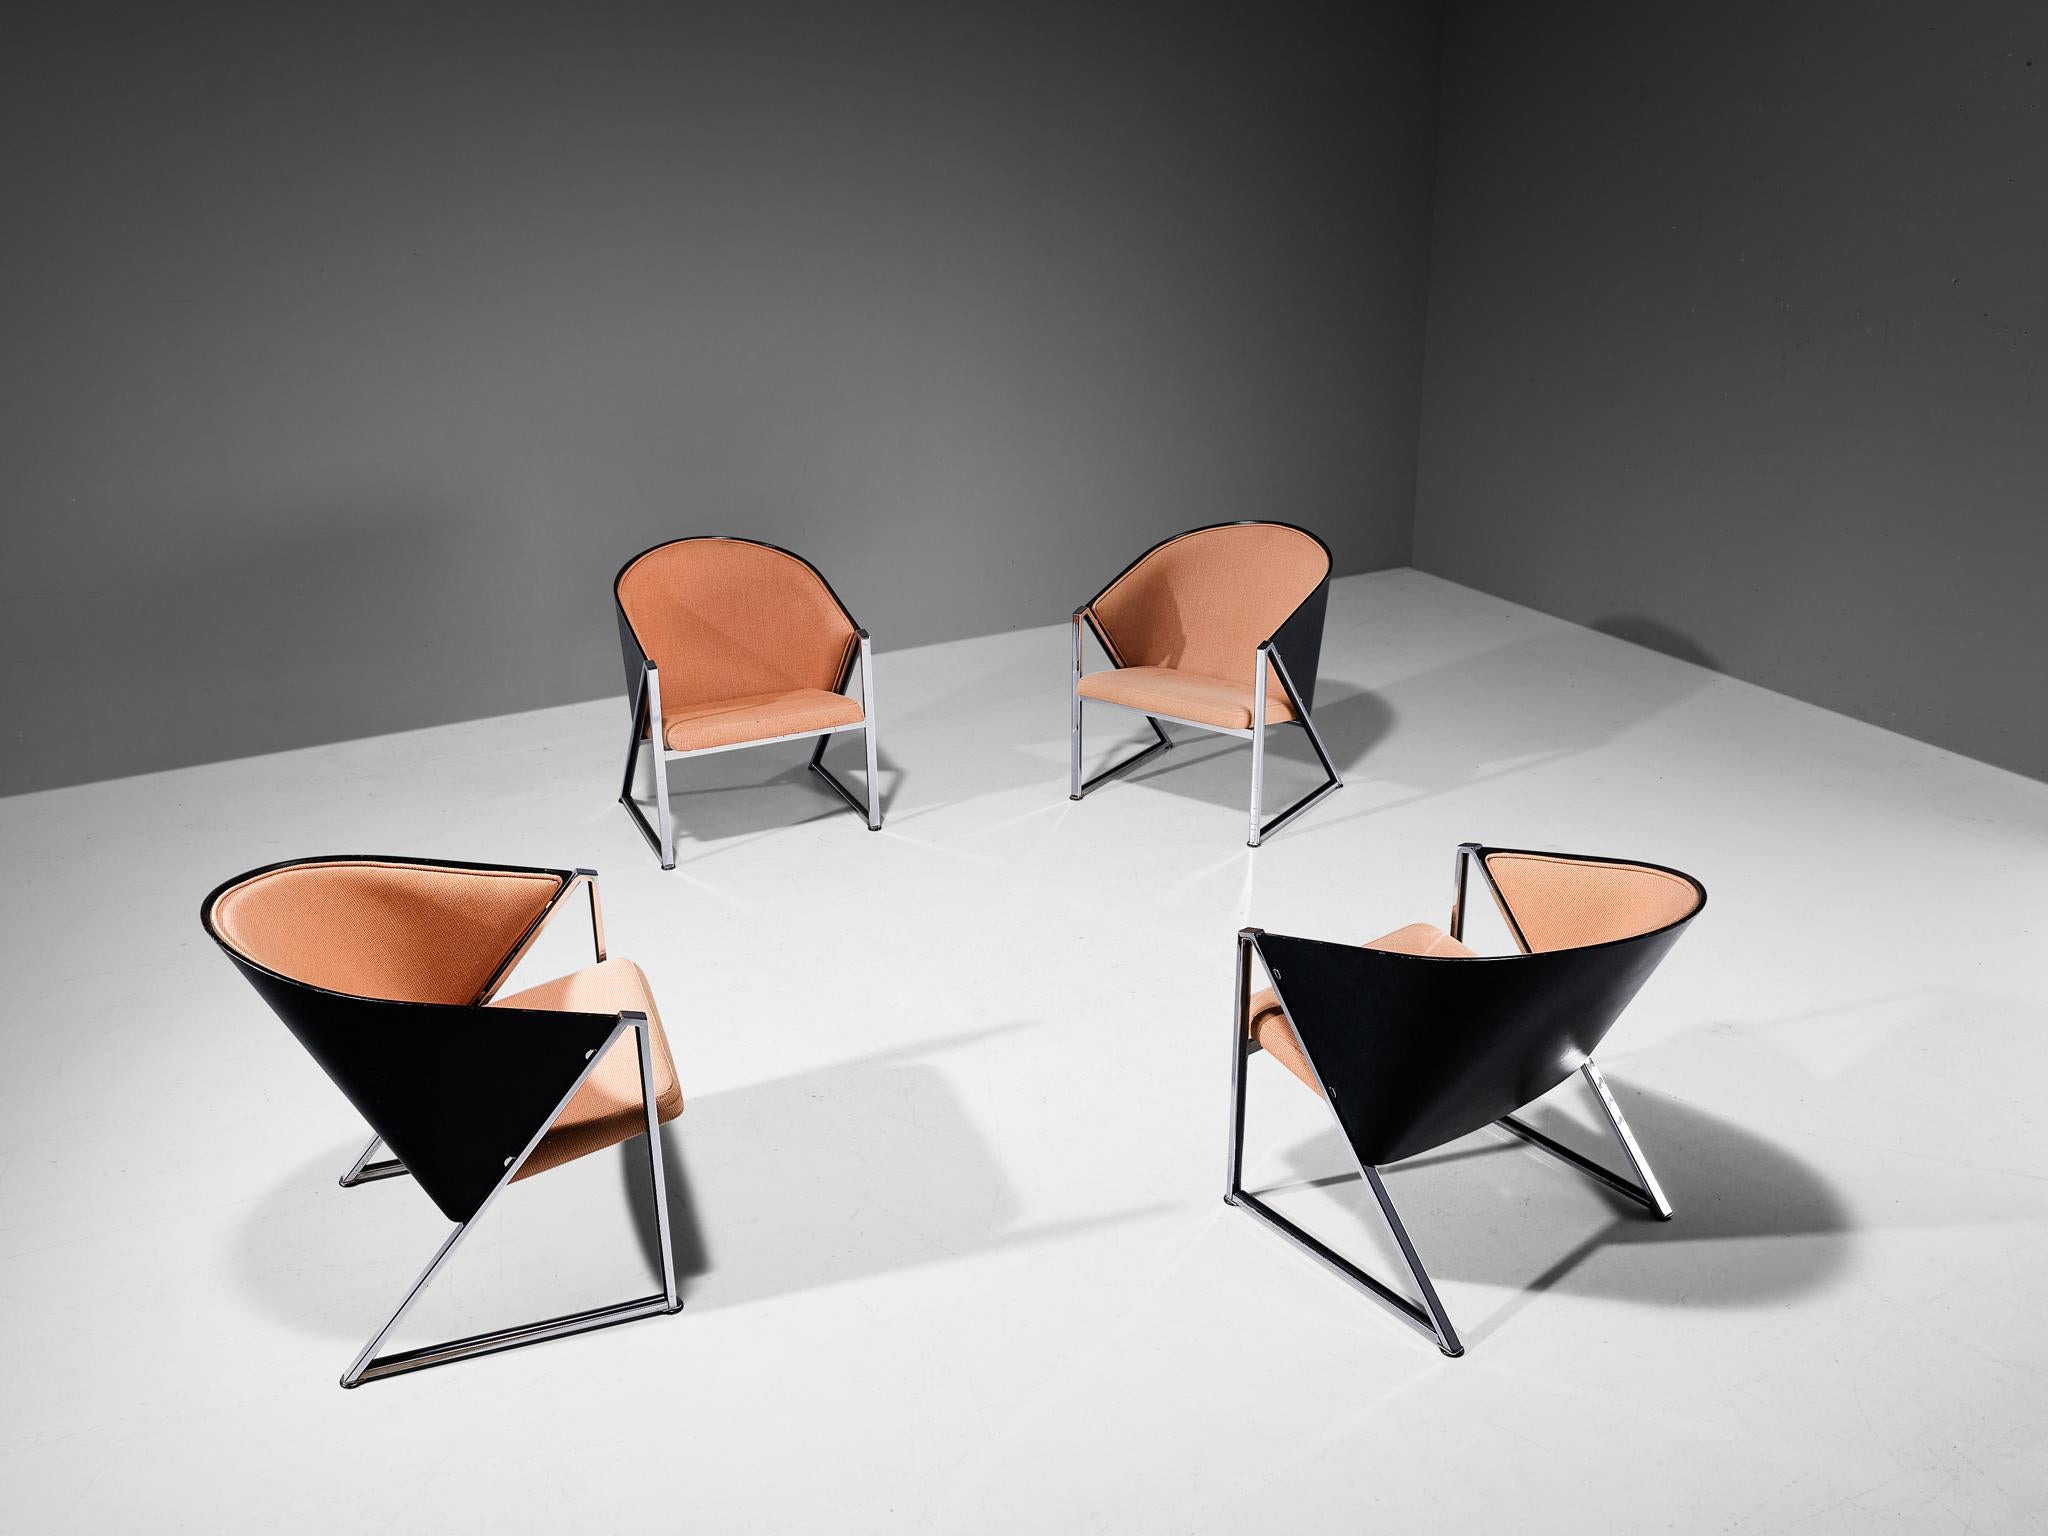 Jouko Järvisalo for Inno Interior OY, armchairs model 'Mondi Soft', chrome-plated metal, fabric, lacquered wood, Finland, design 1986.

Finnish interior architect Jouko Järvisalo created these lounge chairs that feature an unconventional form. This